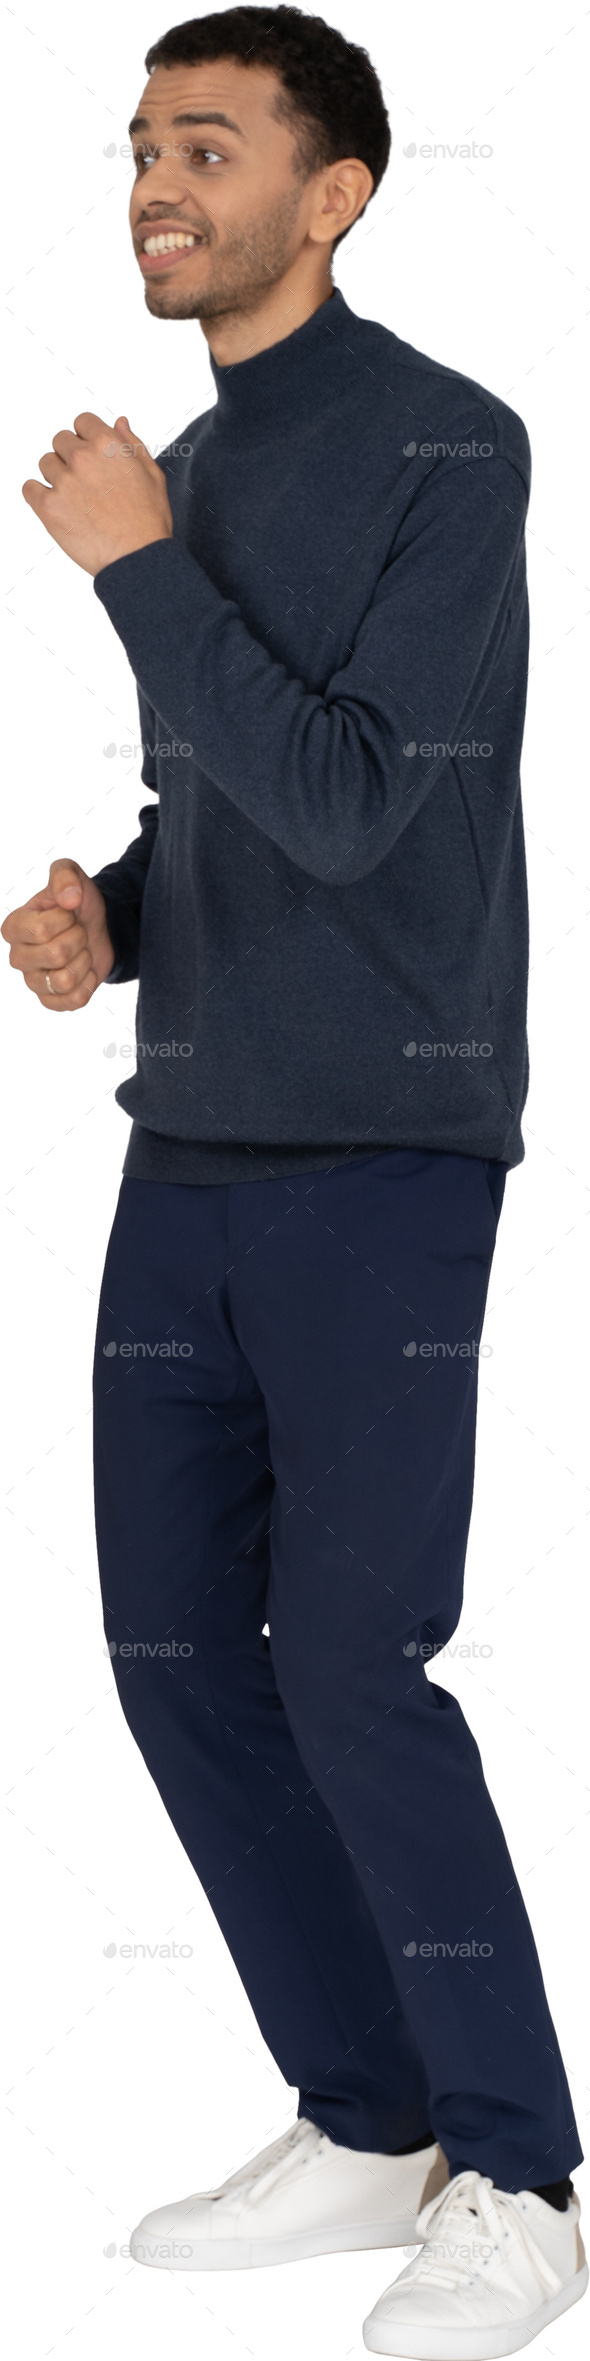 a man in a blue sweatshirt and navy pants is dancing